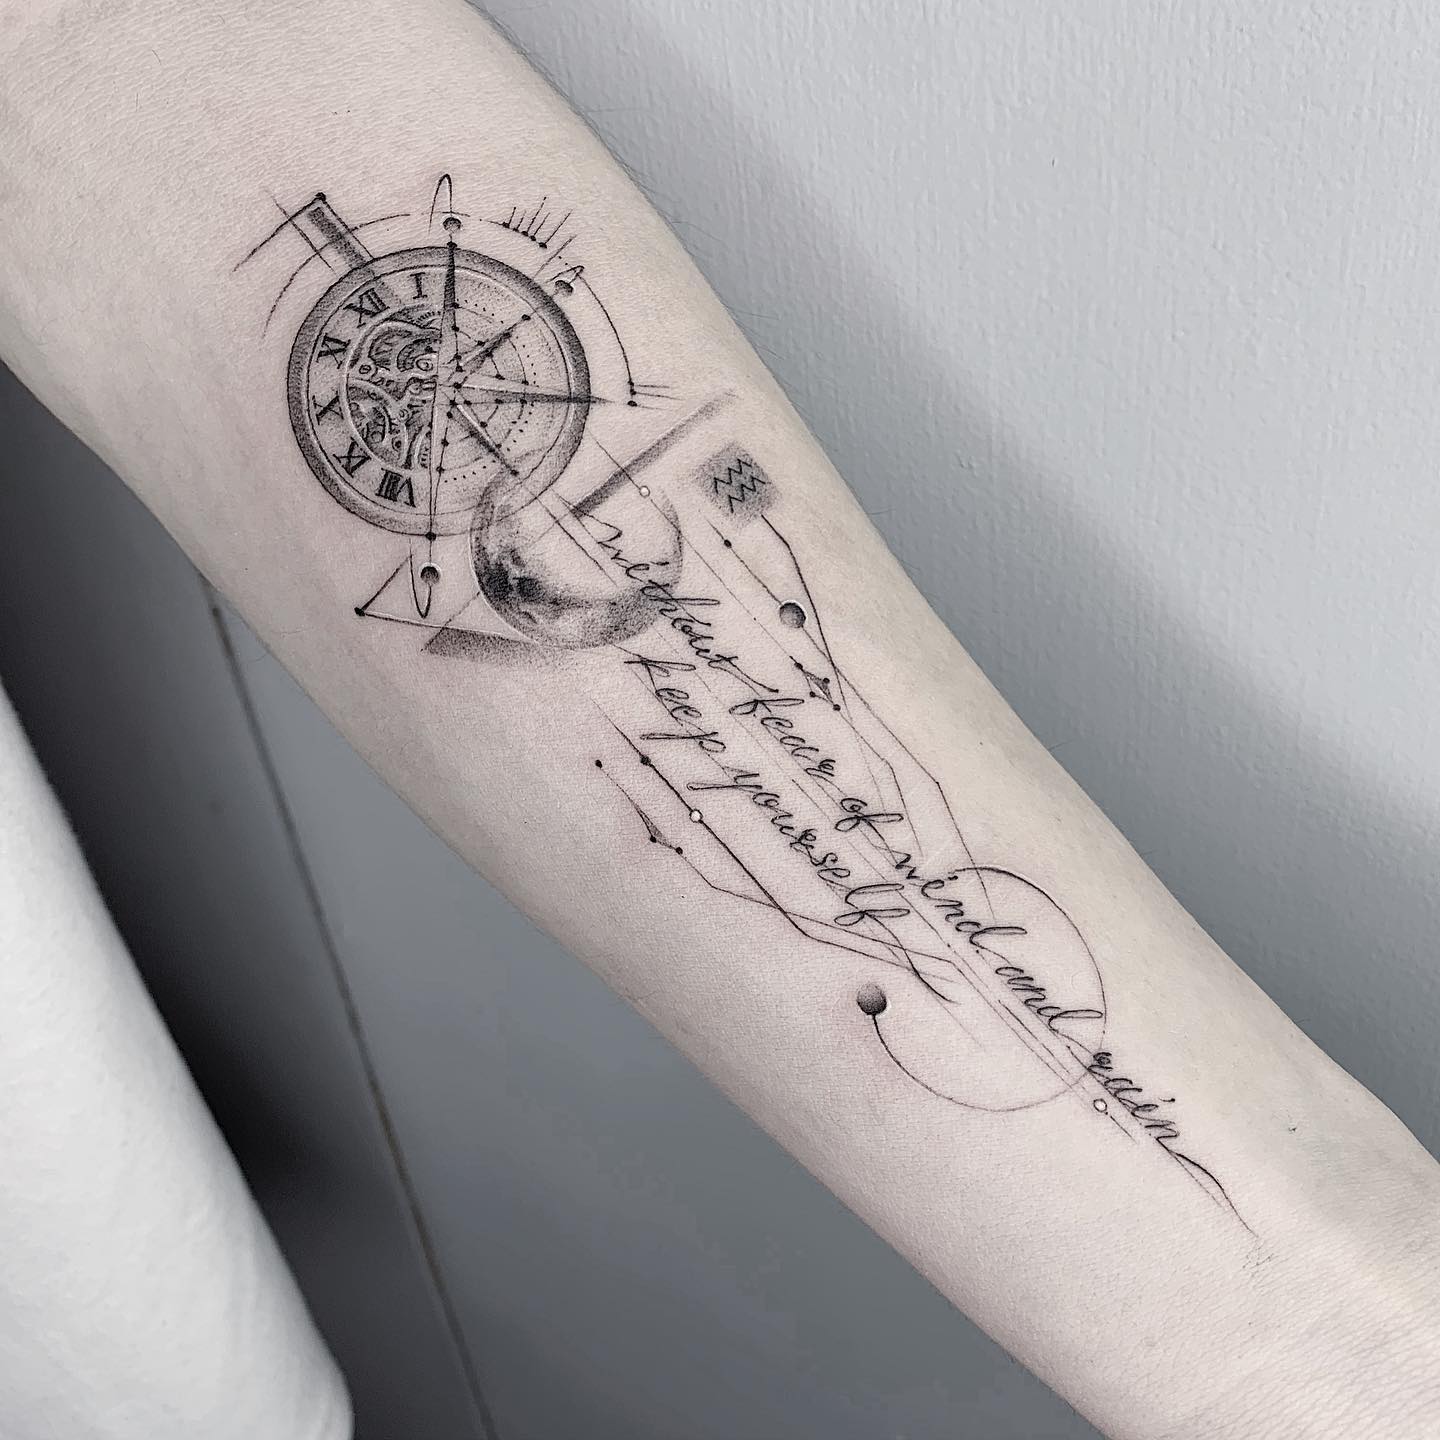 Xpose Tattoos Jaipur  Compass Tattoo with a quote tattoo Cover up tattoo  of a name by an anchor tattoo Contact 917568000888 Website  httpswwwxposetattooscom Address 3rd floor Crystal Palm Mall 22 Godam